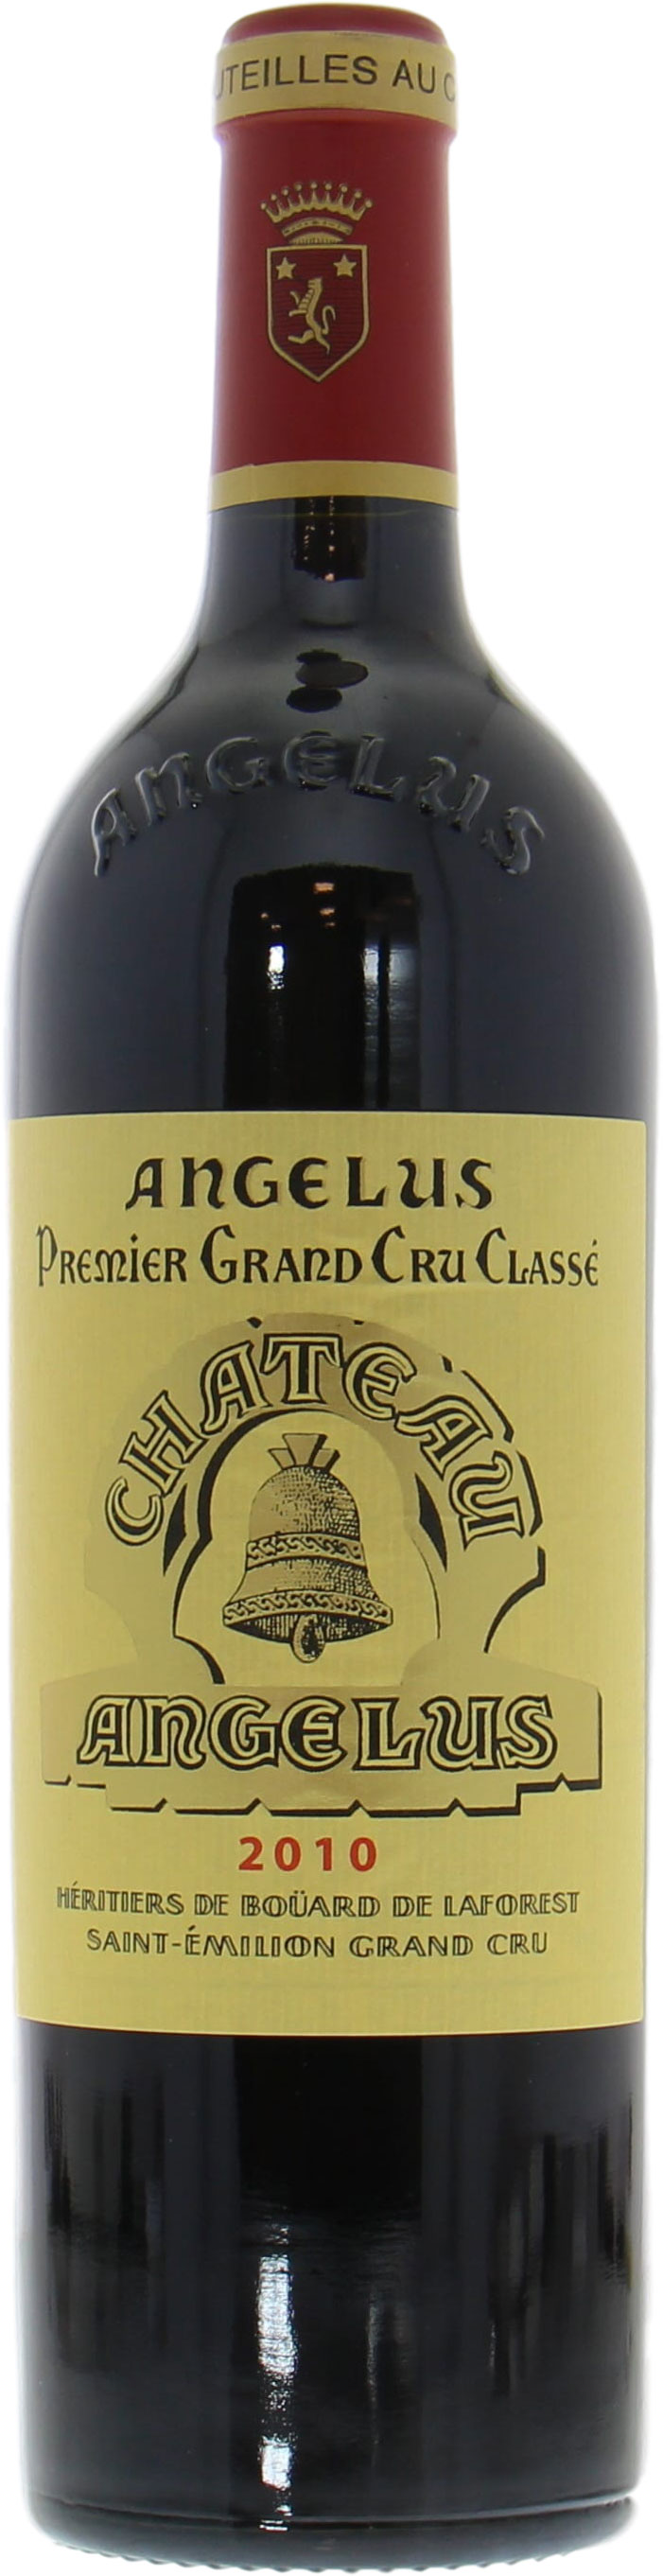 Chateau Angelus - Chateau Angelus 2010 From Original Wooden Case